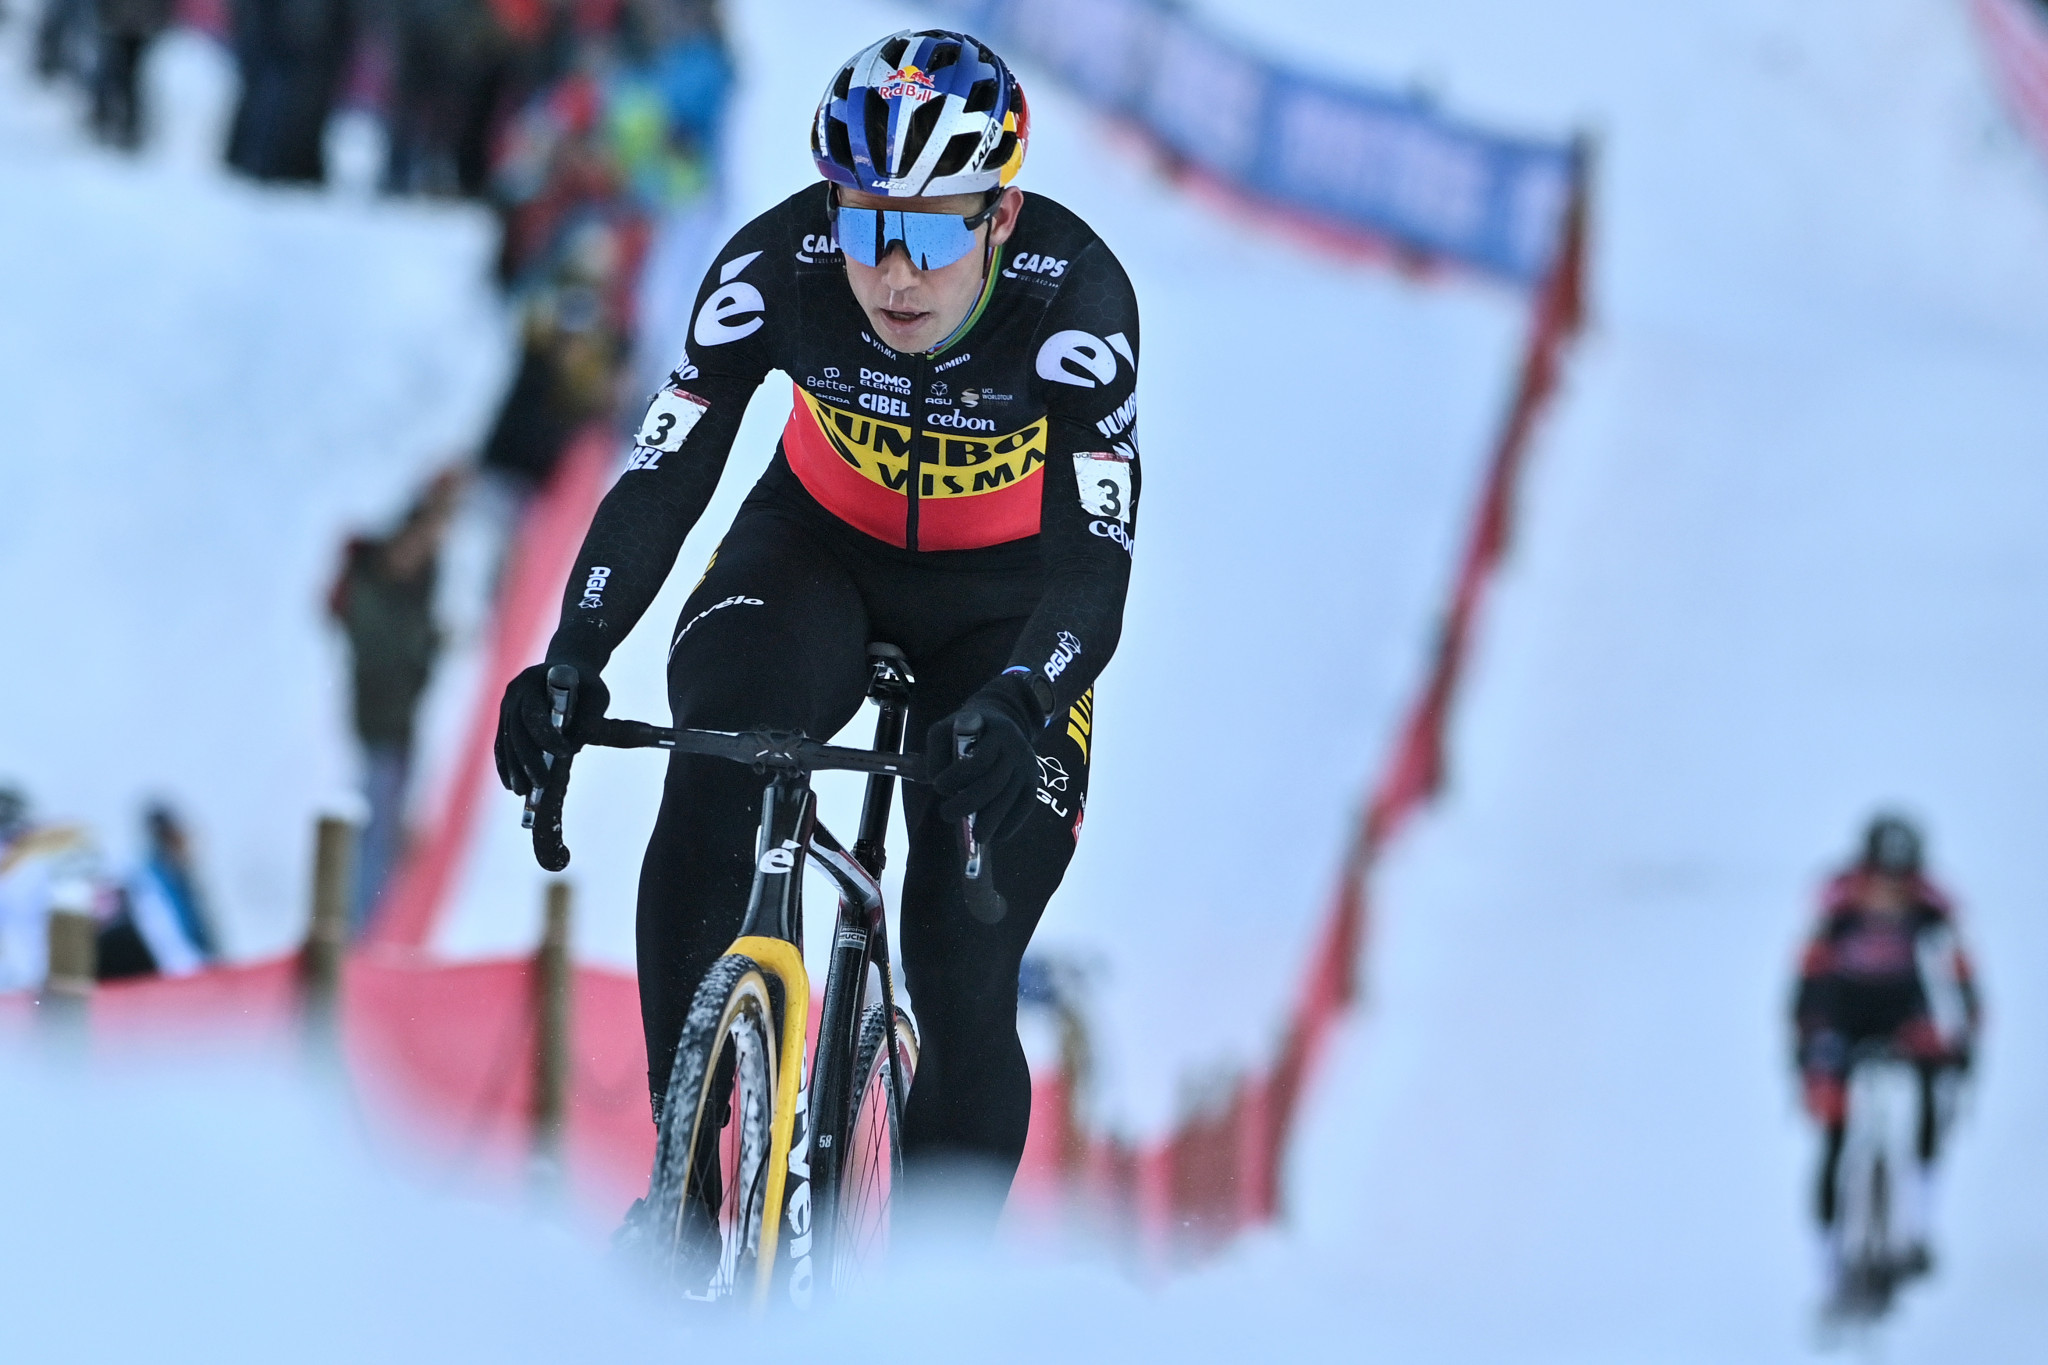 Van Aert and Van Empel succeed on snow at UCI Cyclo-cross World Cup in Val di Sole